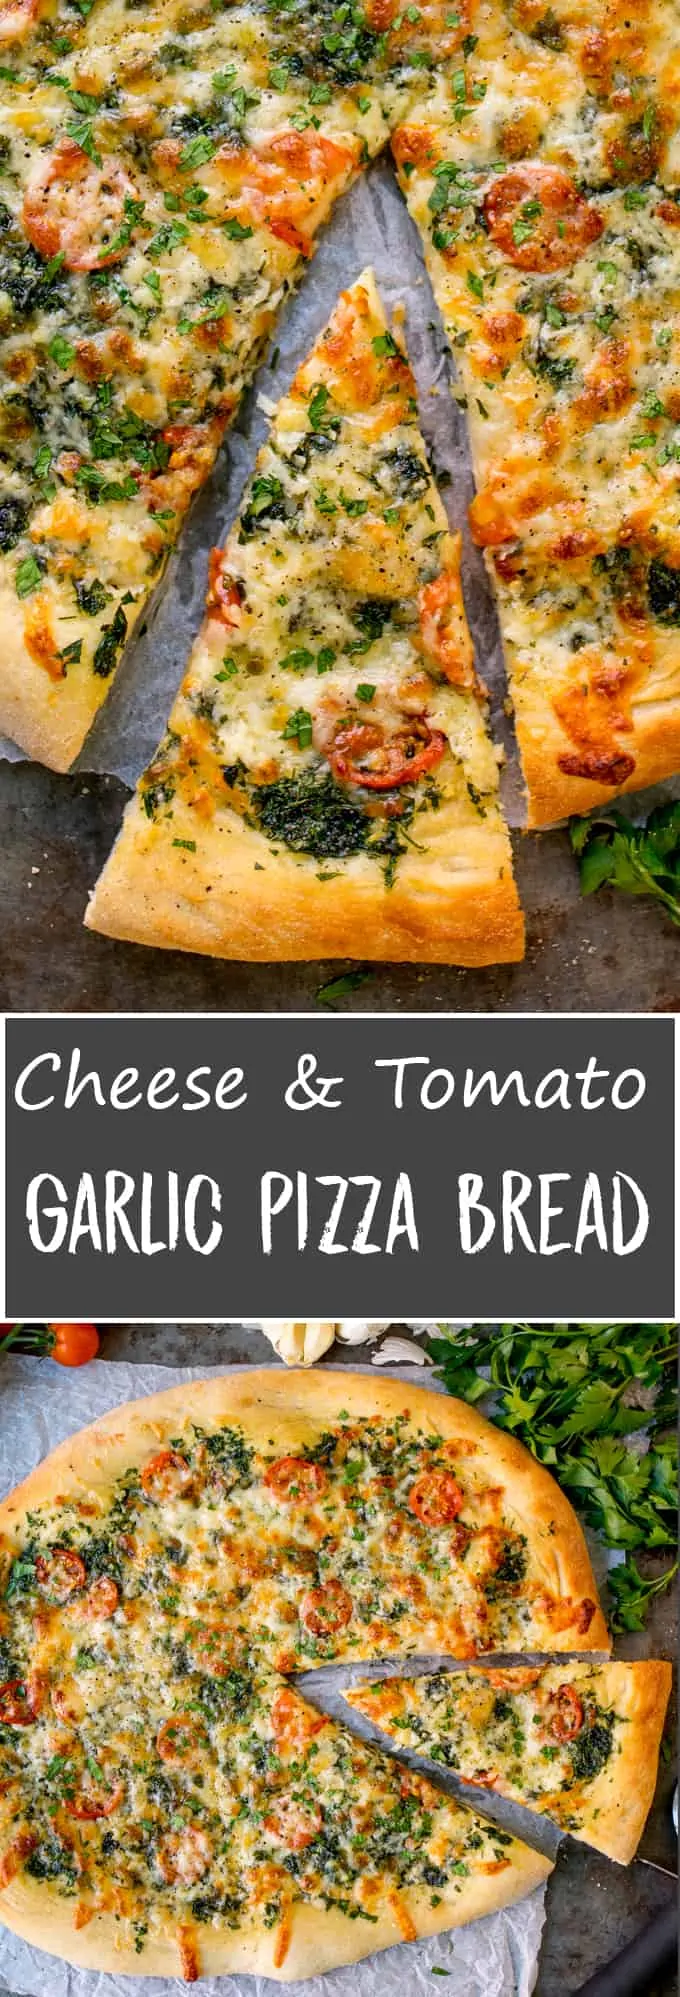 Homemade Cheese and Tomato Garlic Pizza Bread - a crisp dough with that perfect chewy interior, loaded with garlic, tomatoes and two types of cheese!